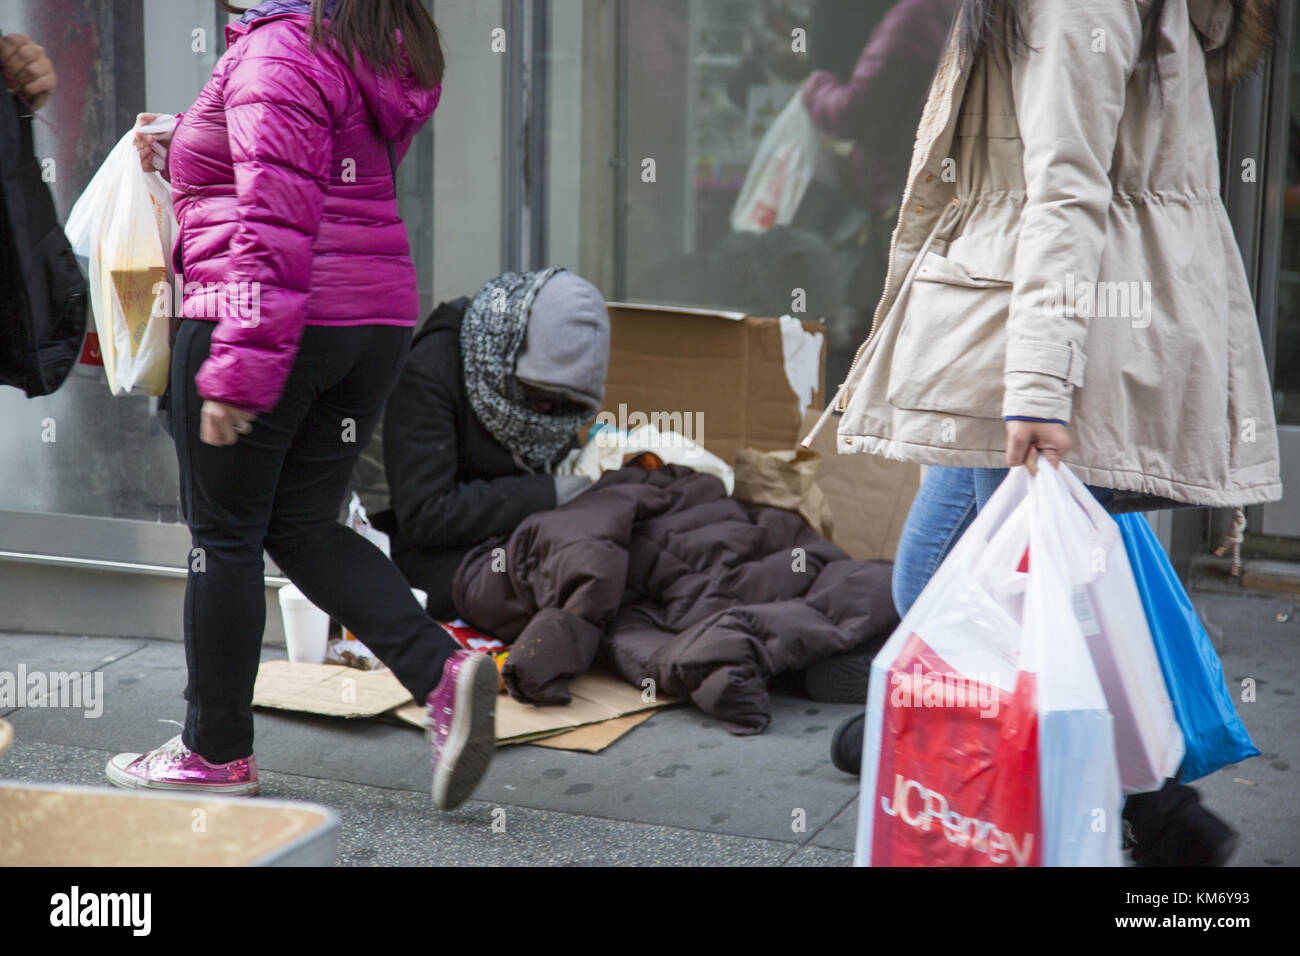 Homeless people share the sidewalks with holiday shoppers in midtown Manhattan on the Black Friday Thanksgiving weekend, marking the official start of the Christmas holiday shopping season. Stock Photo